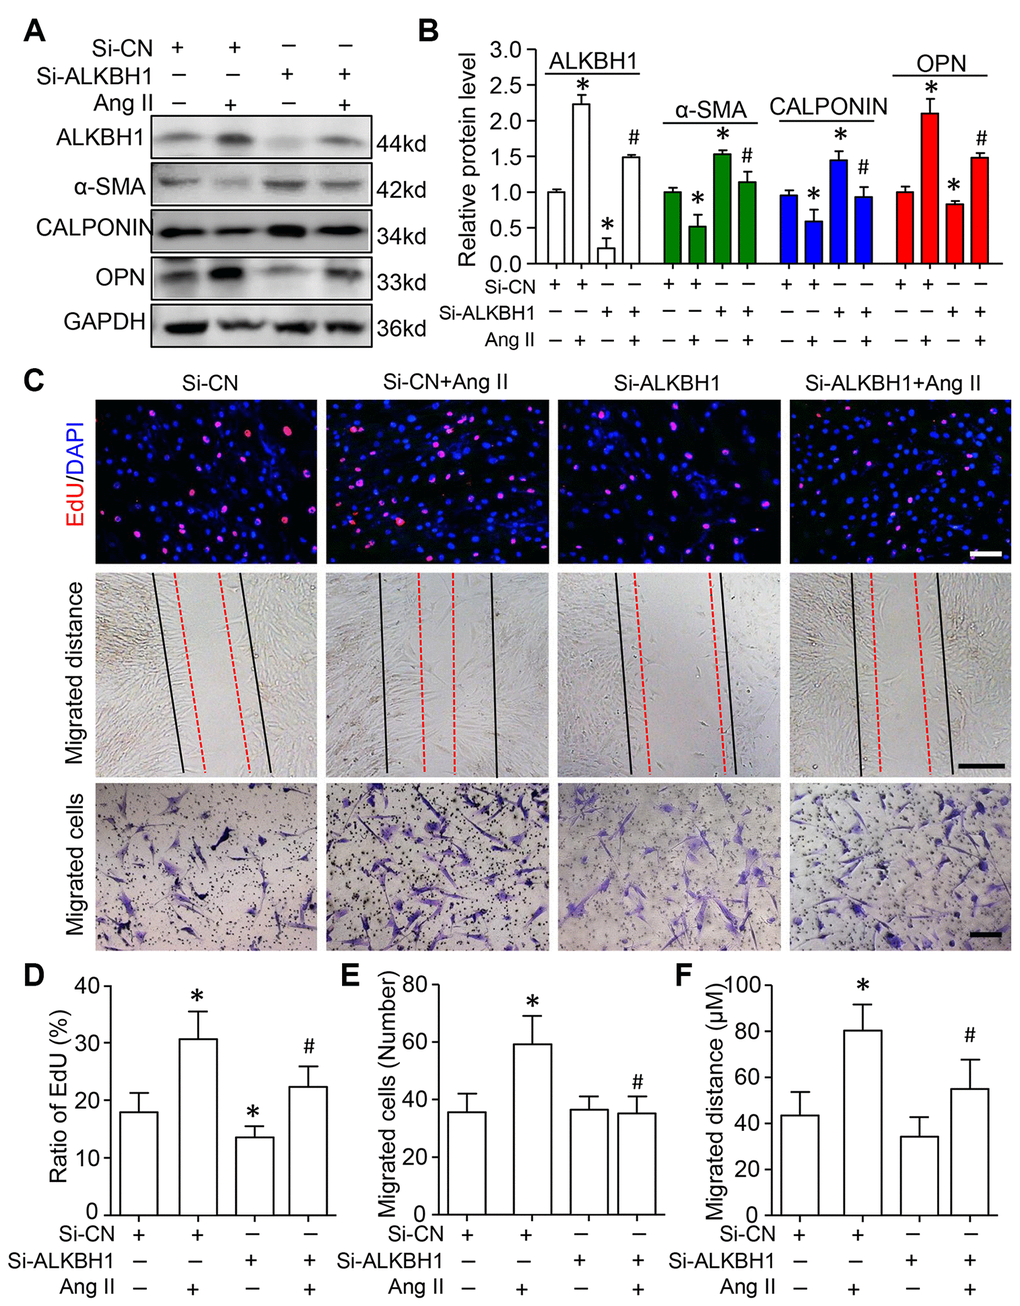 Knockdown of ALKBH1 suppresses Ang II-induced VSMC phenotype transformation, proliferation and migration. (A, B) Representative western blot and quantification of levels of ALKBH1, alpha-smooth muscle actin (α-SMA), CALPONIN, and osteopontin (OPN) in si-RNA-ALKBH1 (Si-ALKBH1)– or si-RNA Control (Si-CN)–transfected HASMCs with Ang II treatment or not. (C–F) Representative images of EdU staining, HASMC migration distance and number with Si-ALKBH1 and/or Ang II treatment and quantification. Scale bar: 100 μm. *P #P A and B, n= 5/group for C–F). One-way ANOVA followed by Bonferroni’s multiple comparison test was used for statistical analysis in B and D.